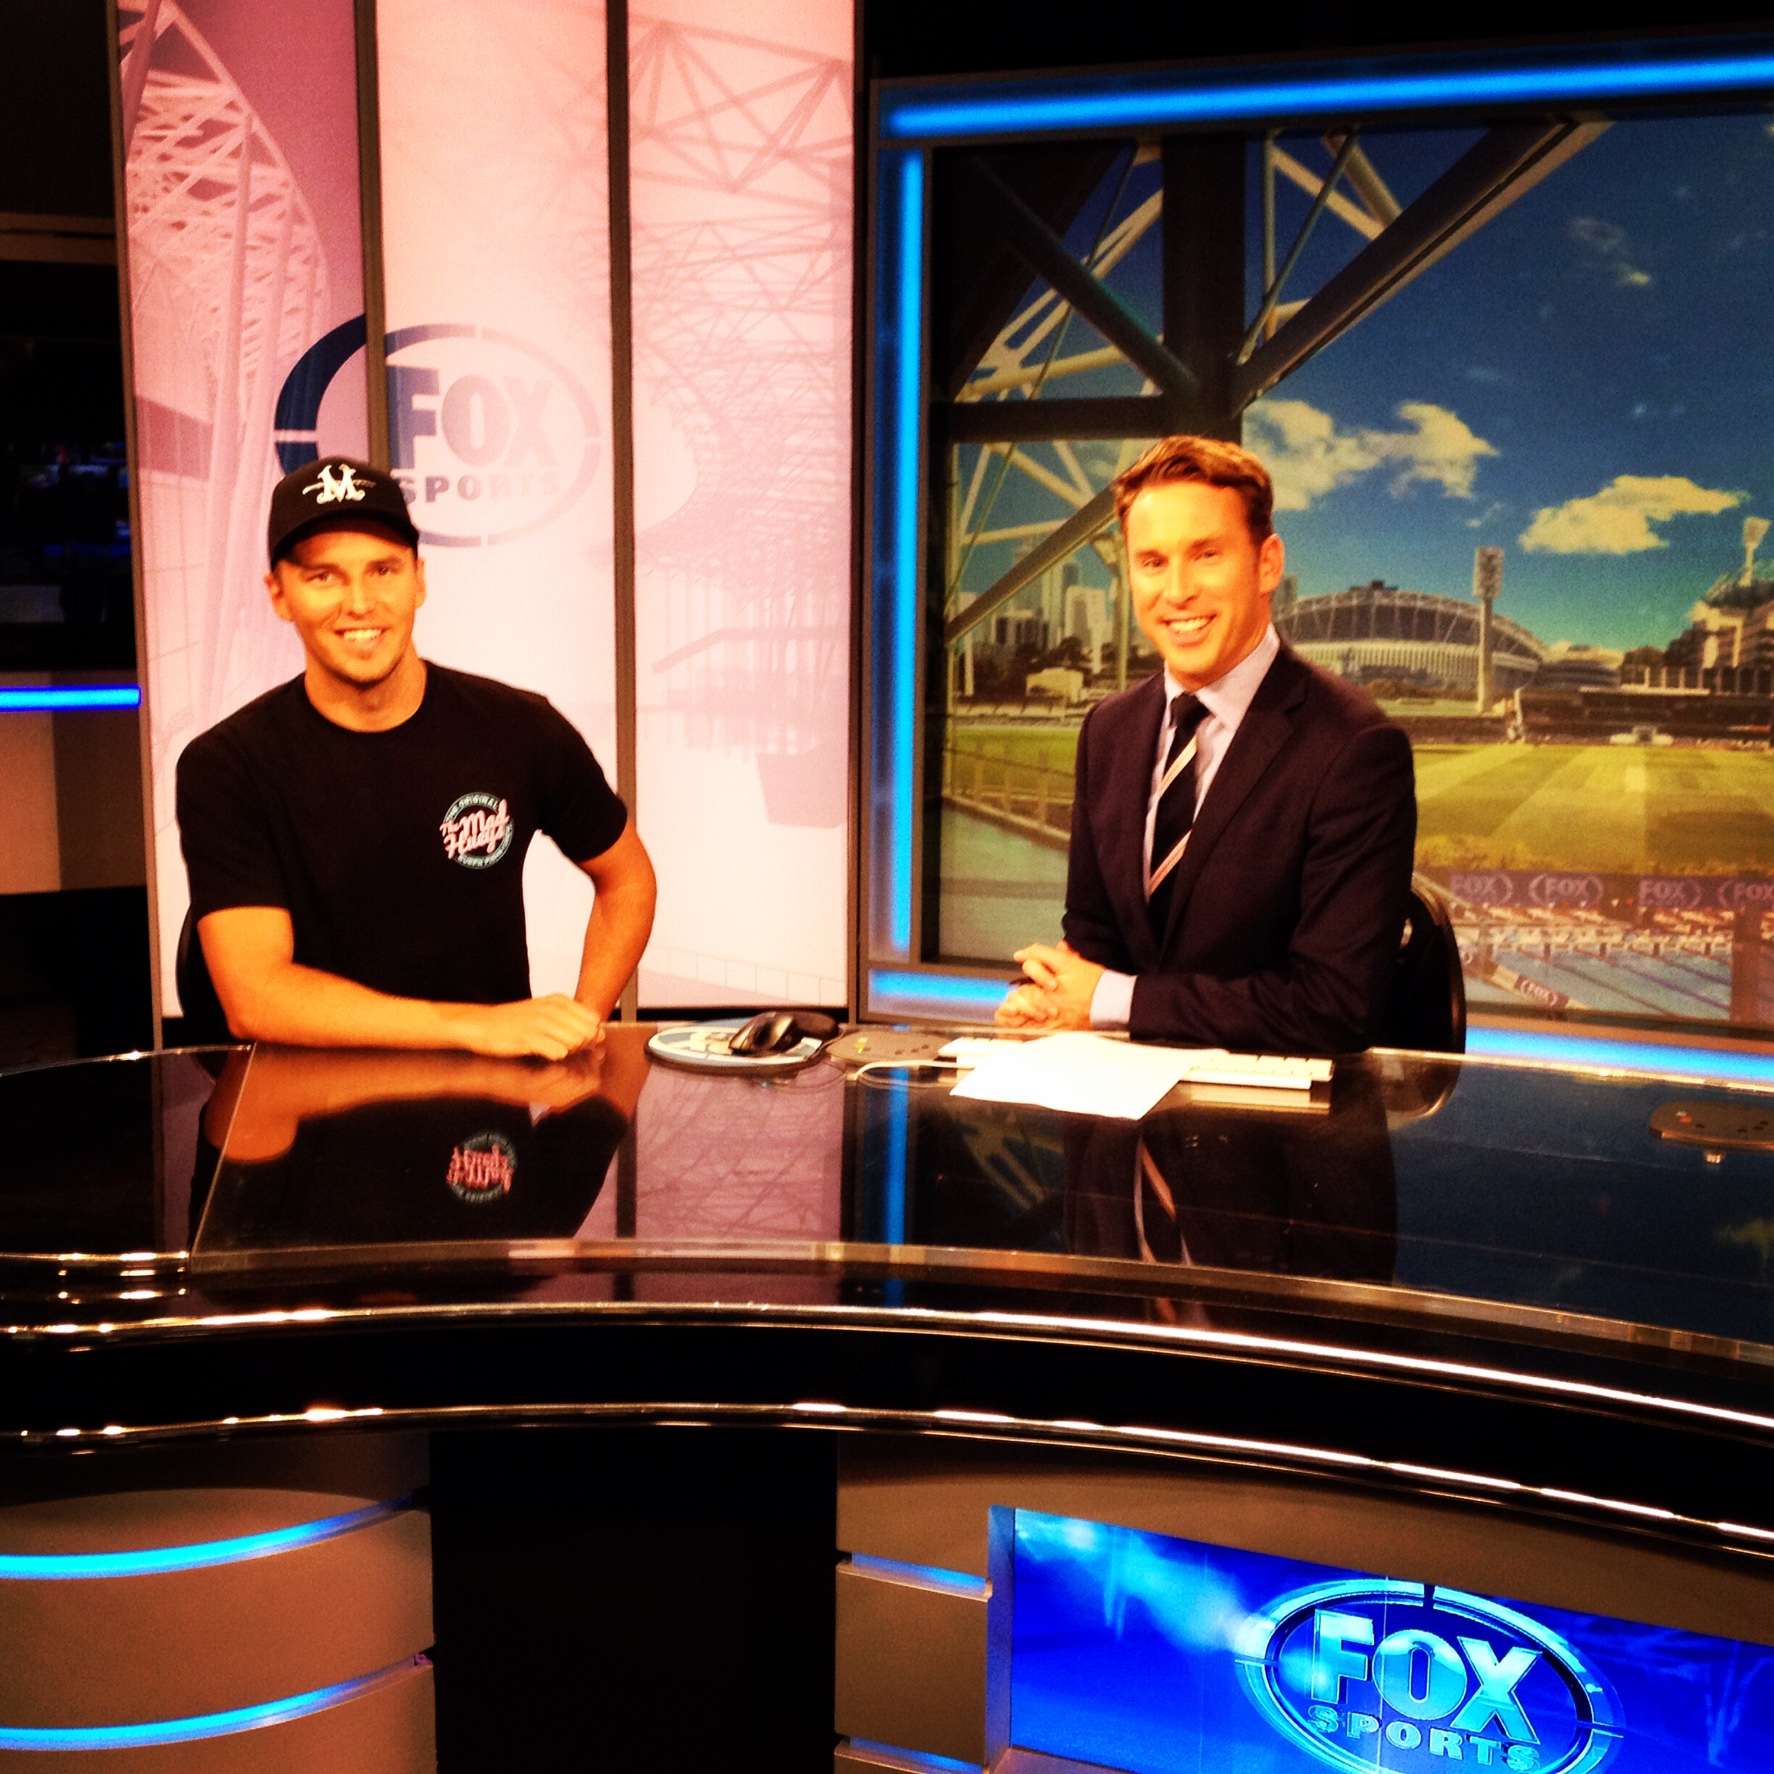 An interview with Fox Sports helped increase awareness in Australia about professional bass fishing.